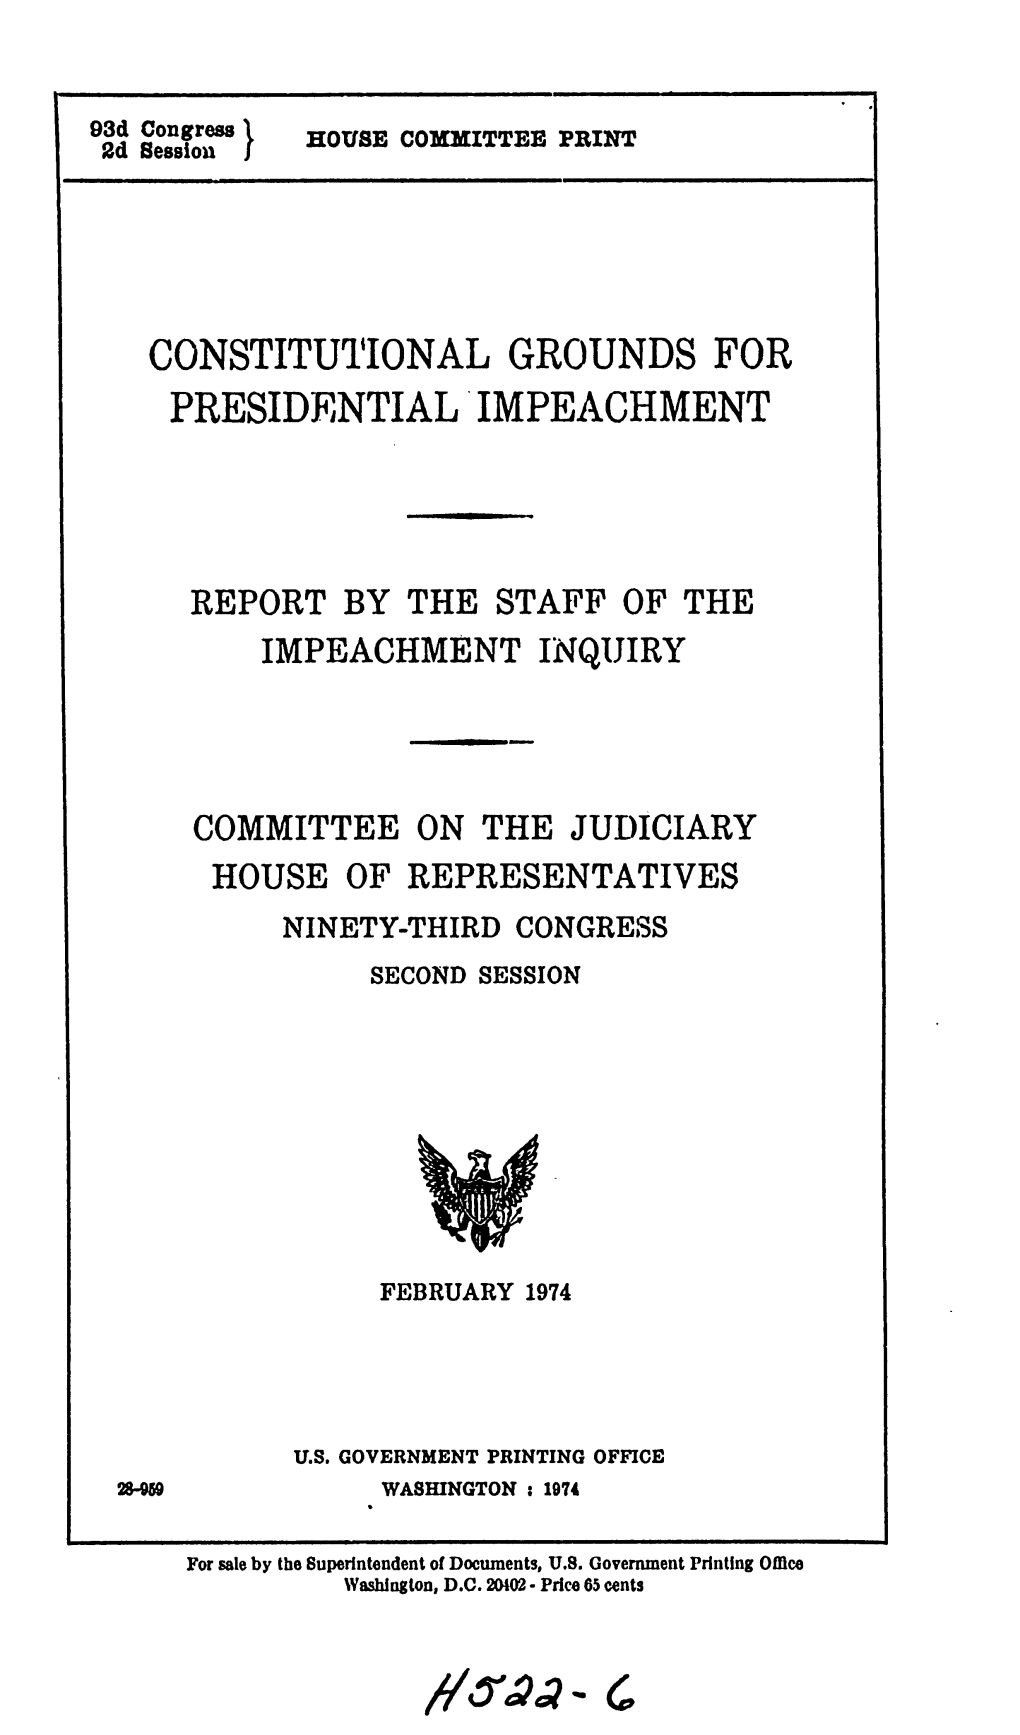 Constitutional Grounds for Presidential'impeachment